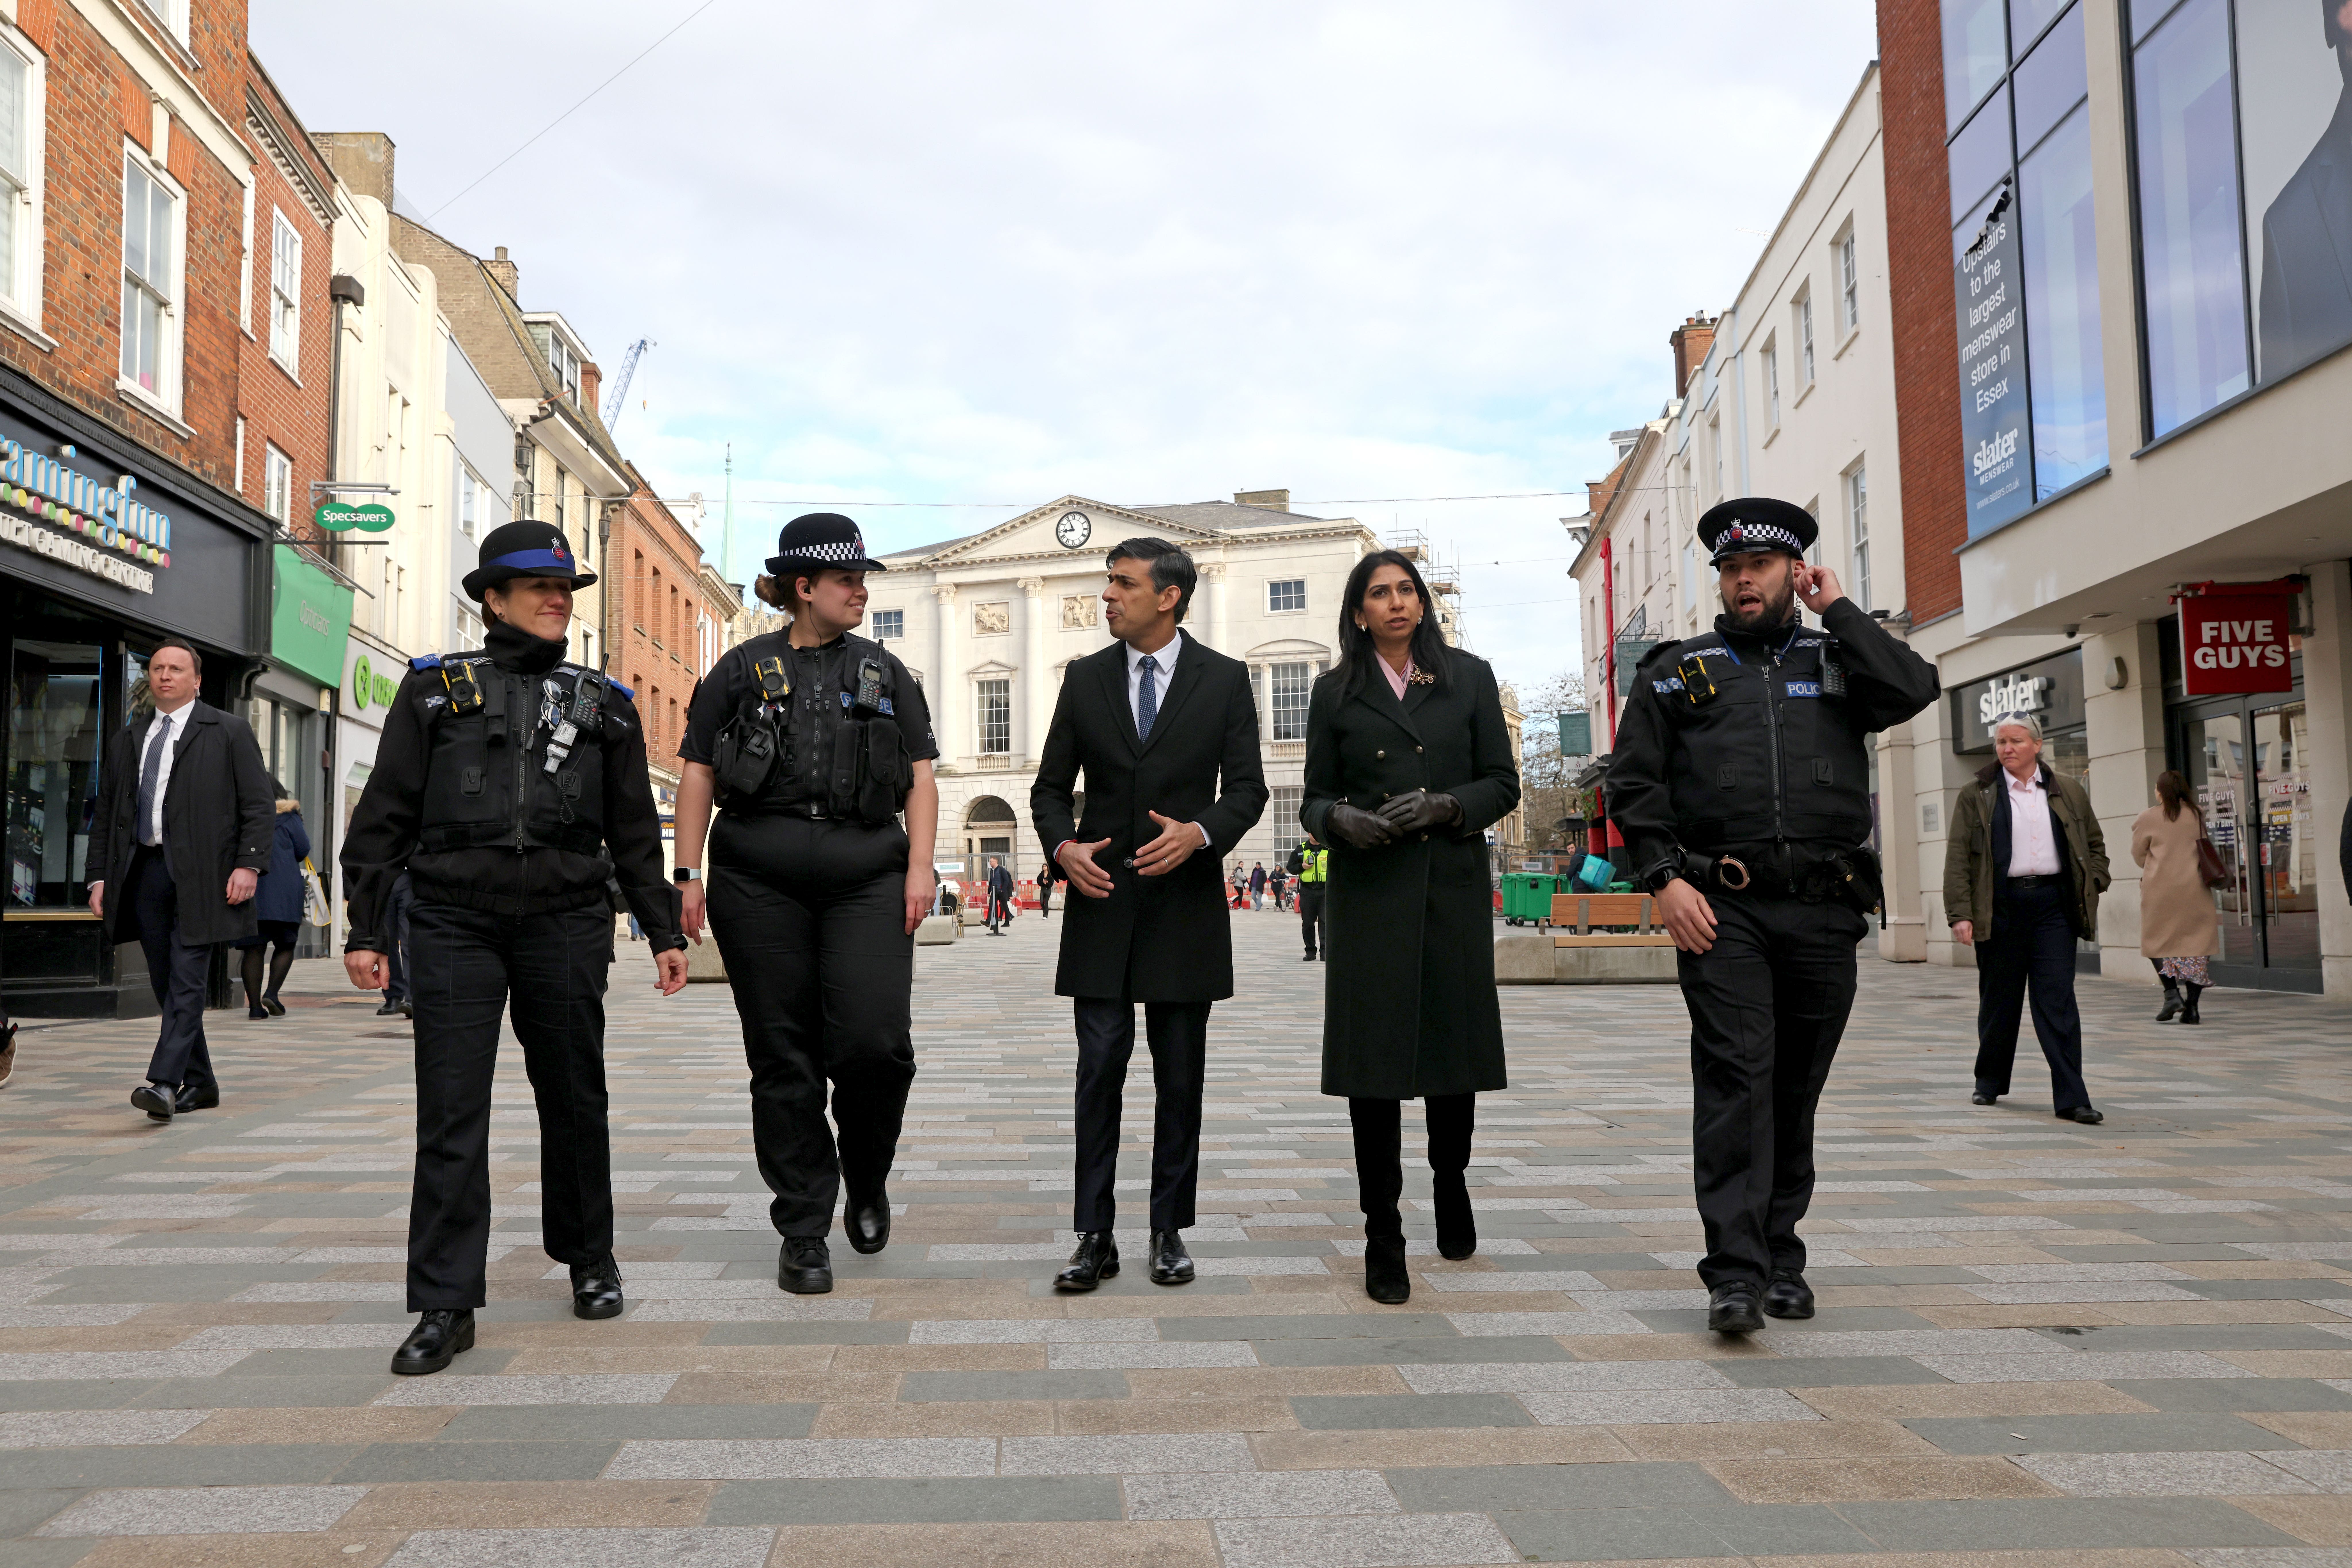 From left: Community support officer Sonja Viner, police sergeant Sophie Chesters, Prime Minister Rishi Sunak, Home Secretary Suella Braverman and police sergeant Matt Collins during a visit to a community centre in Chelmsford, Essex (Jack Hill/The Times/PA)